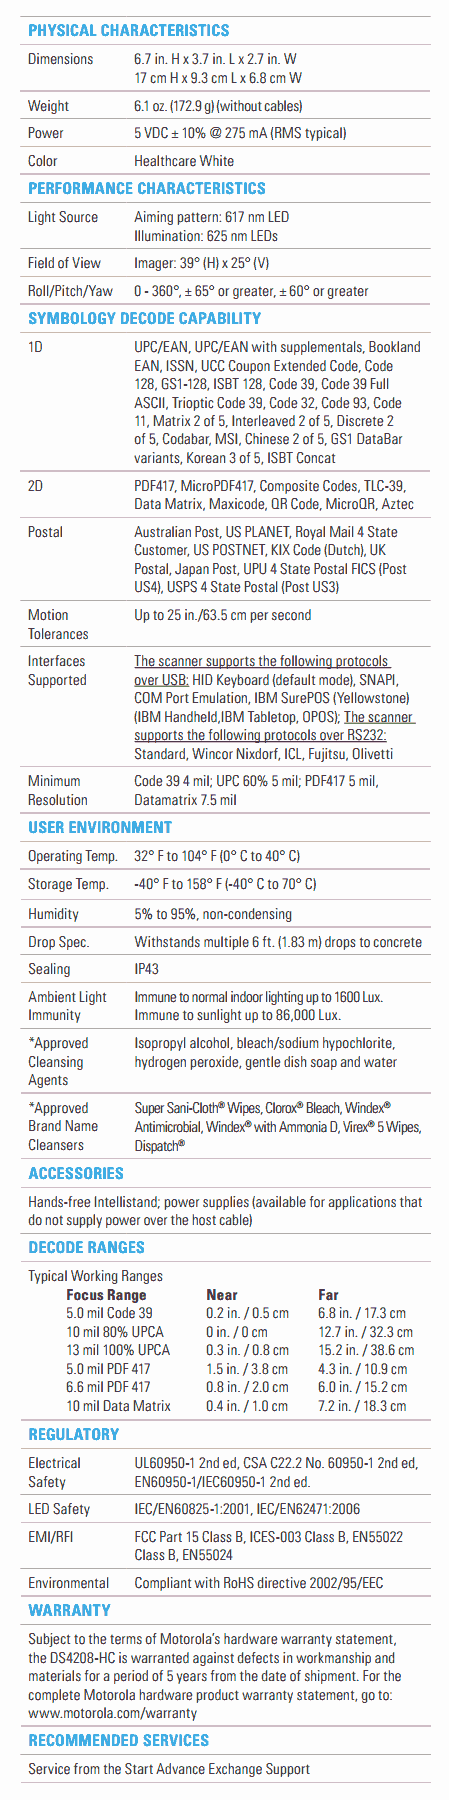 DS4208-HC Specifications